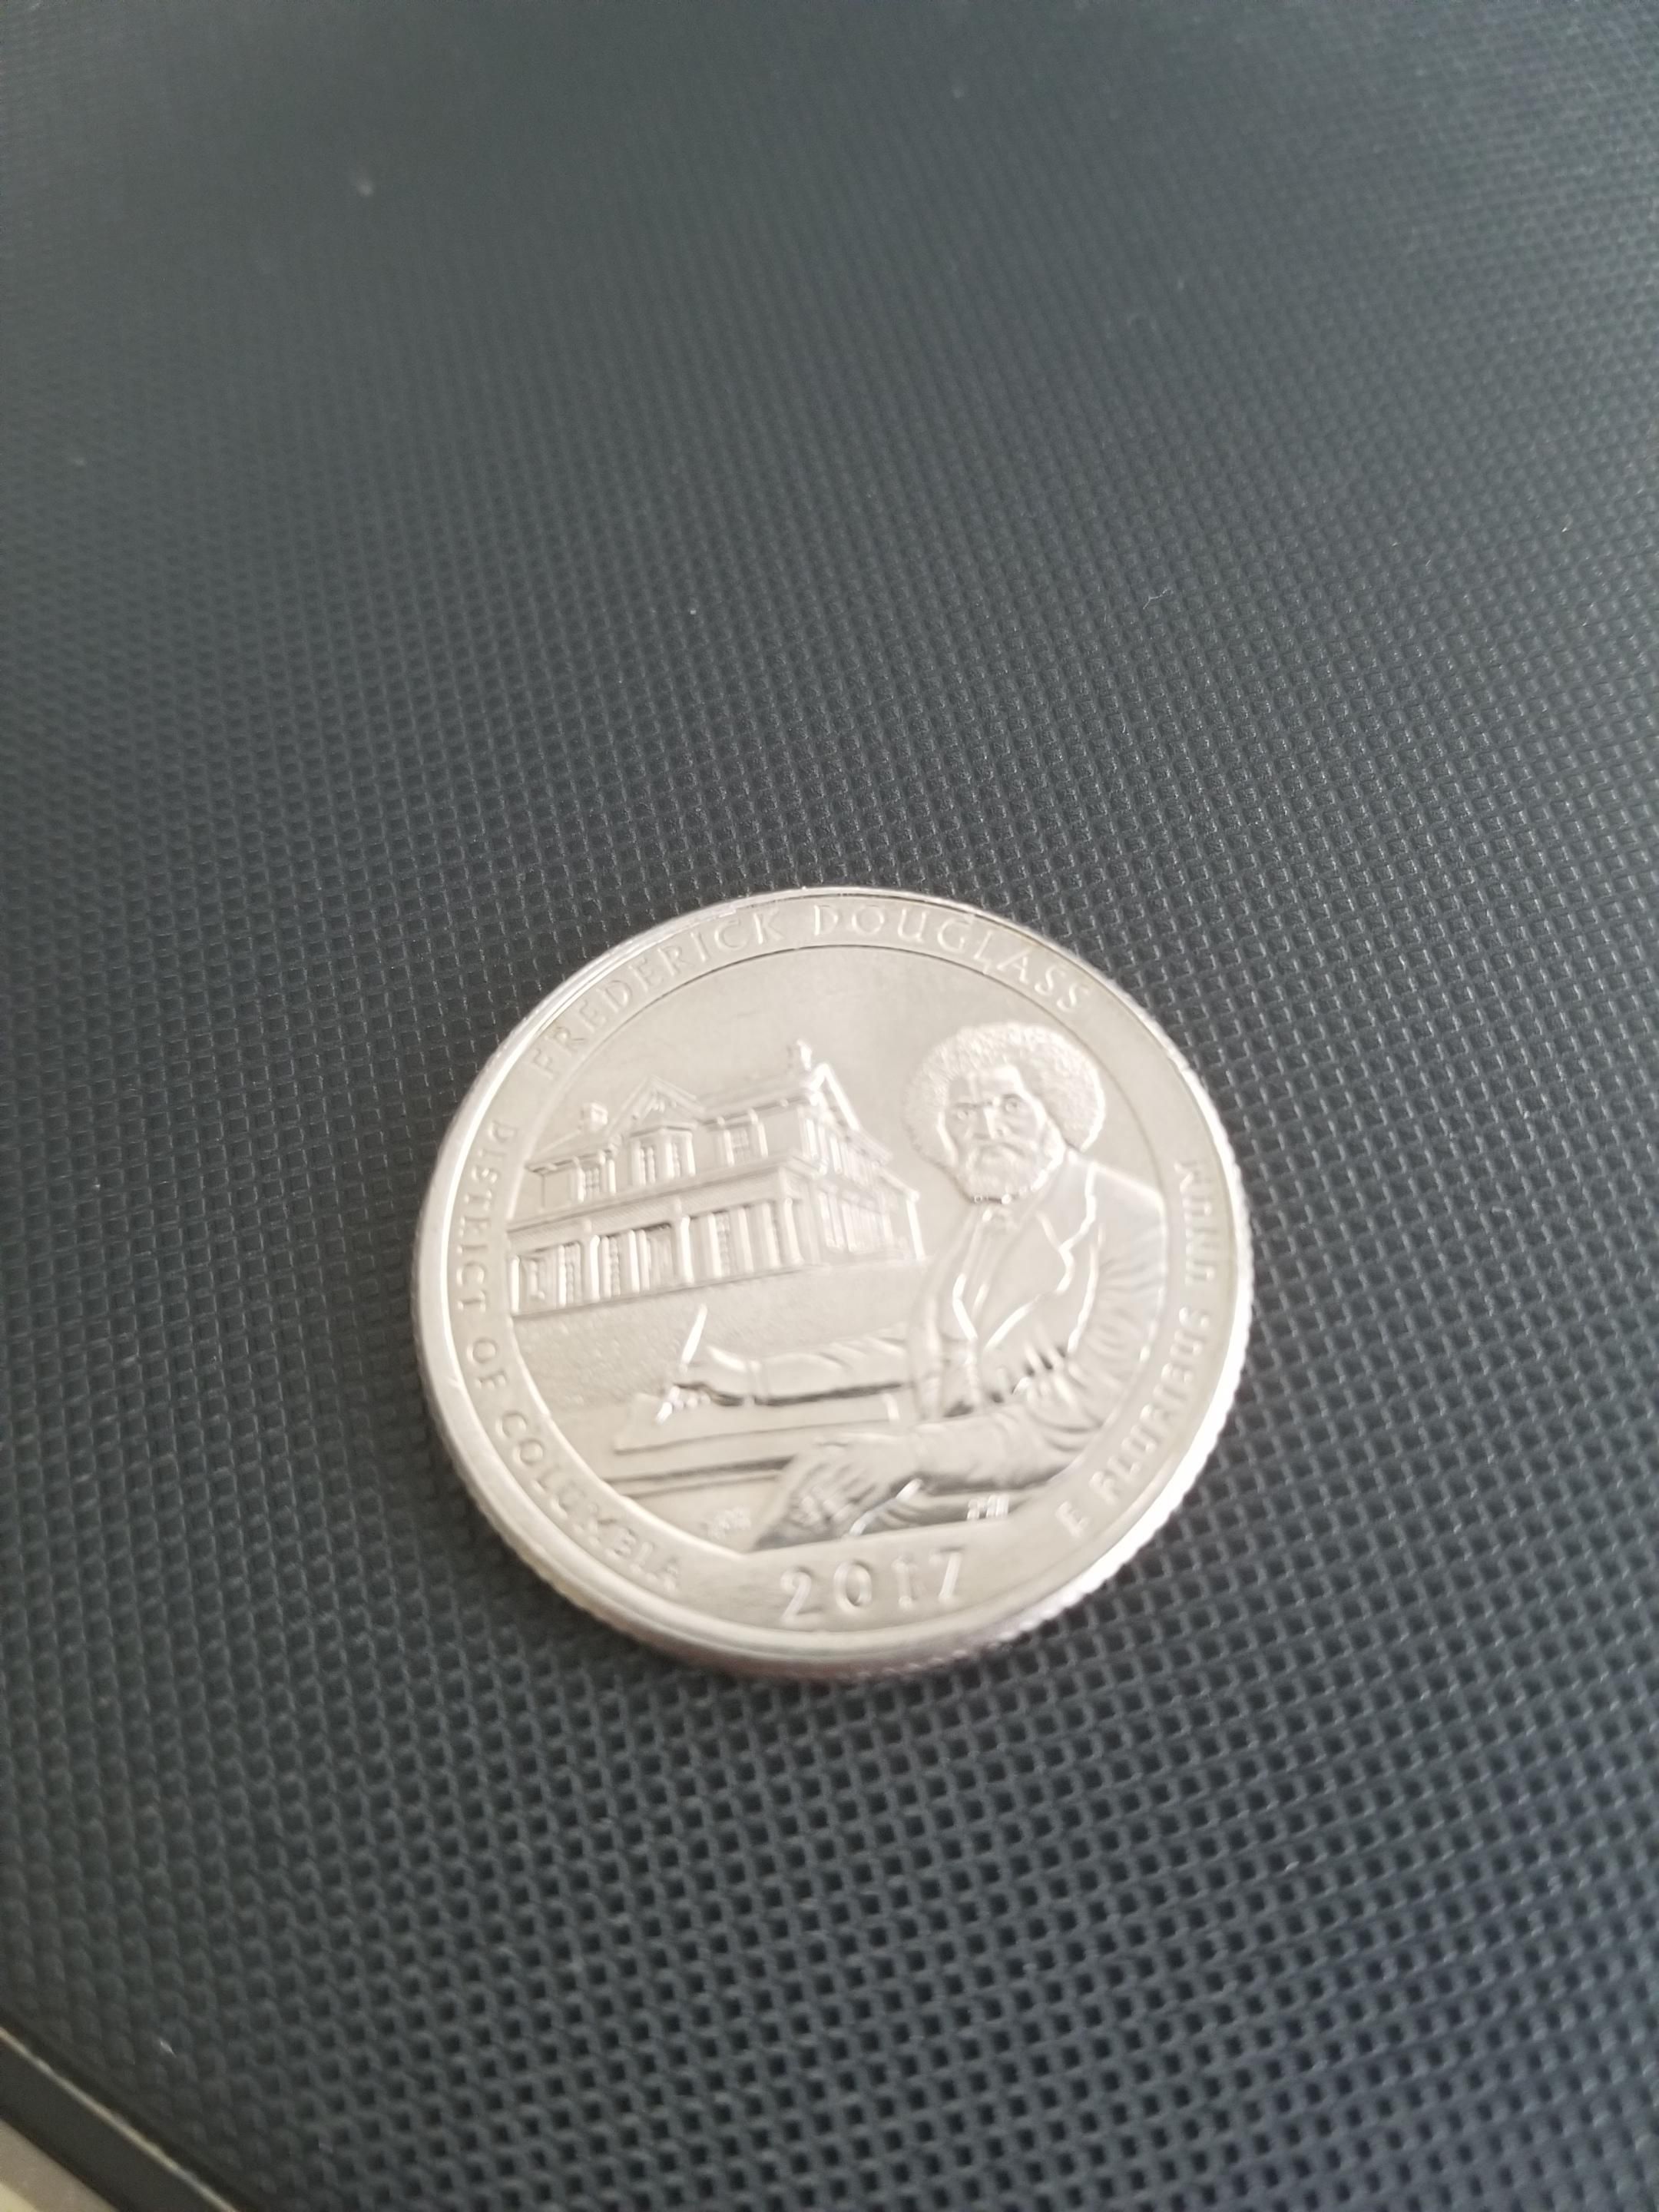 Totally thought Bob Ross got his own quarter at first glance